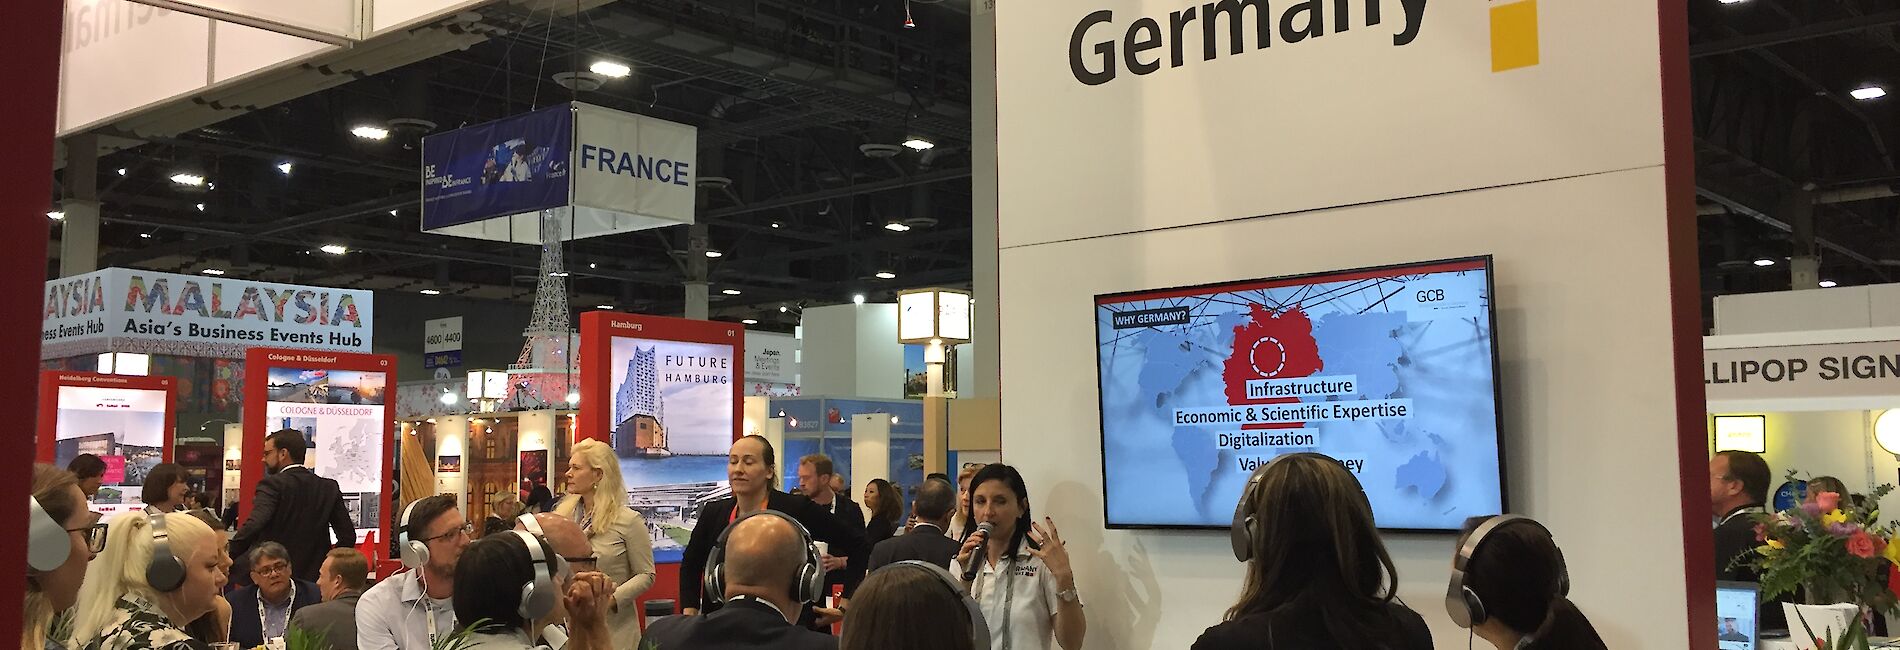 Visitors at Germany's IMEX America 2019 stand